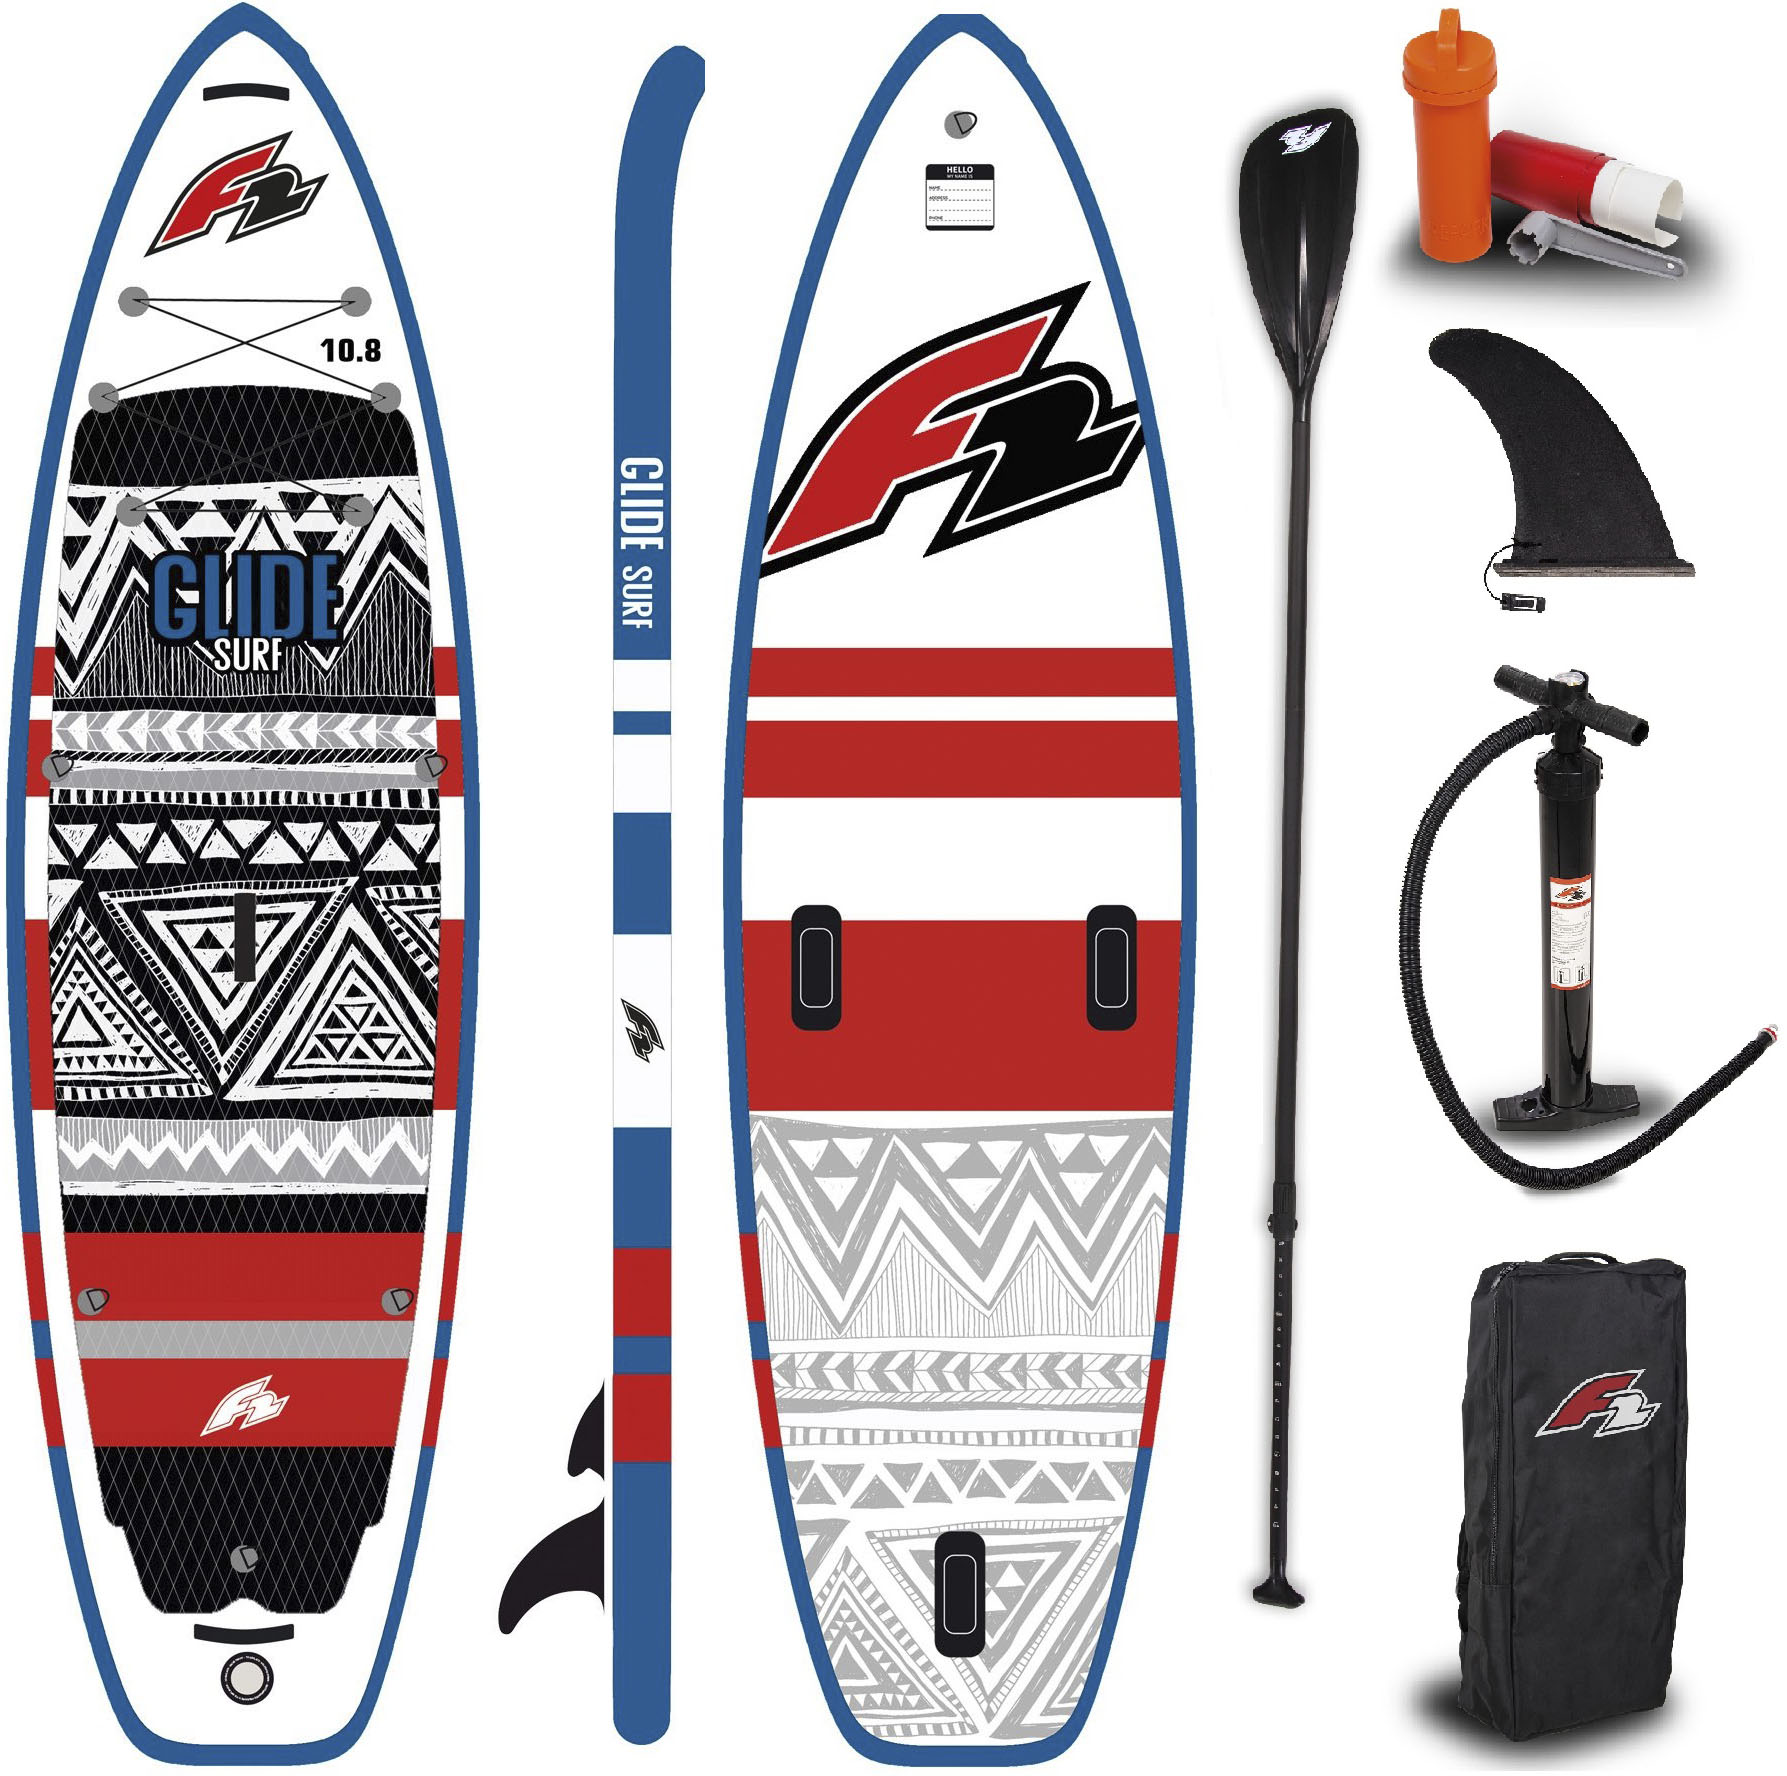 F2 Inflatable SUP-Board "Glide Surf 10,8 red", (Packung, 5 tlg.)